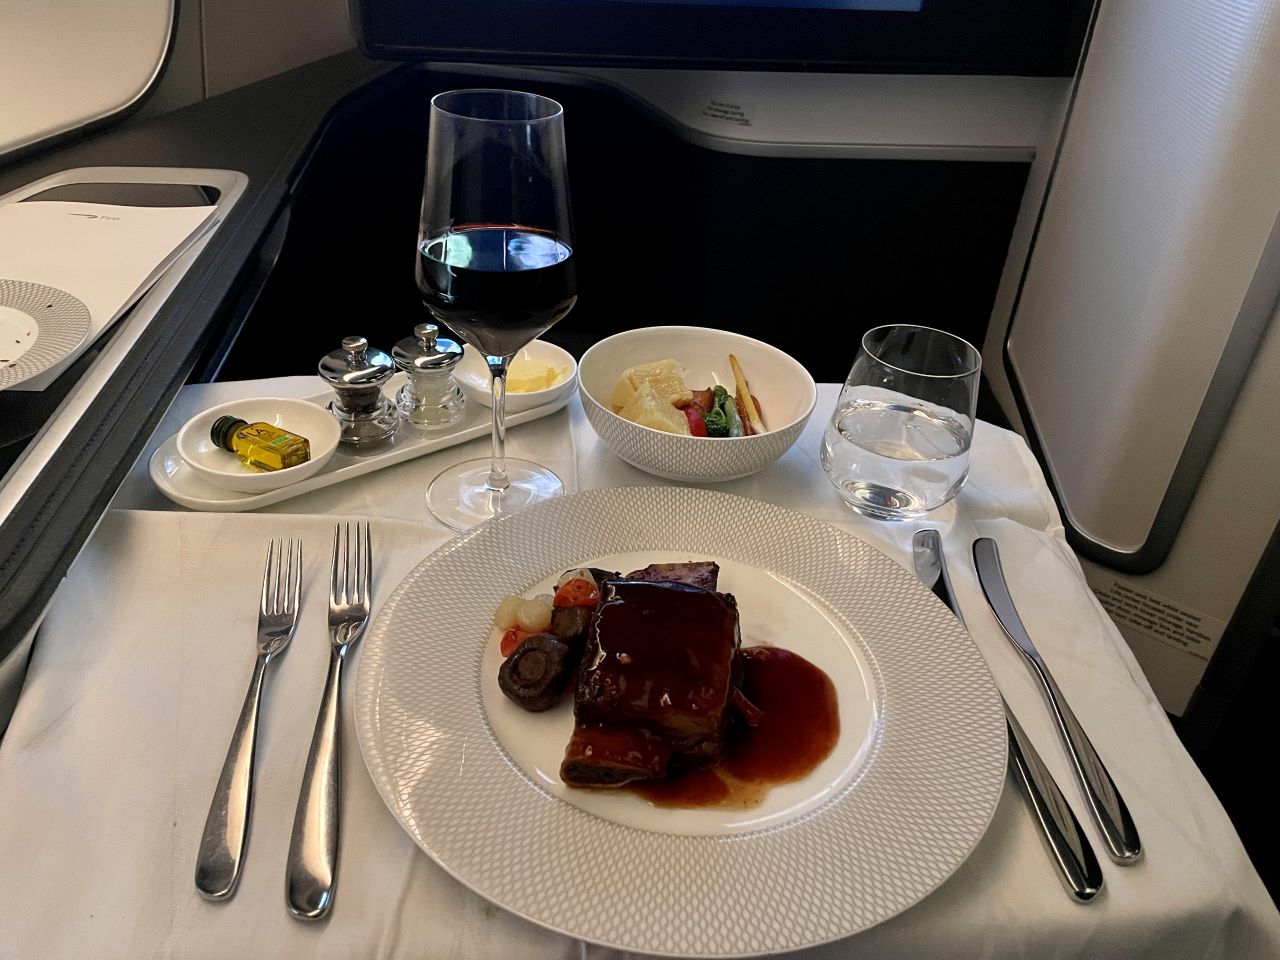 BA First Class Braised beef short rib and cheese course